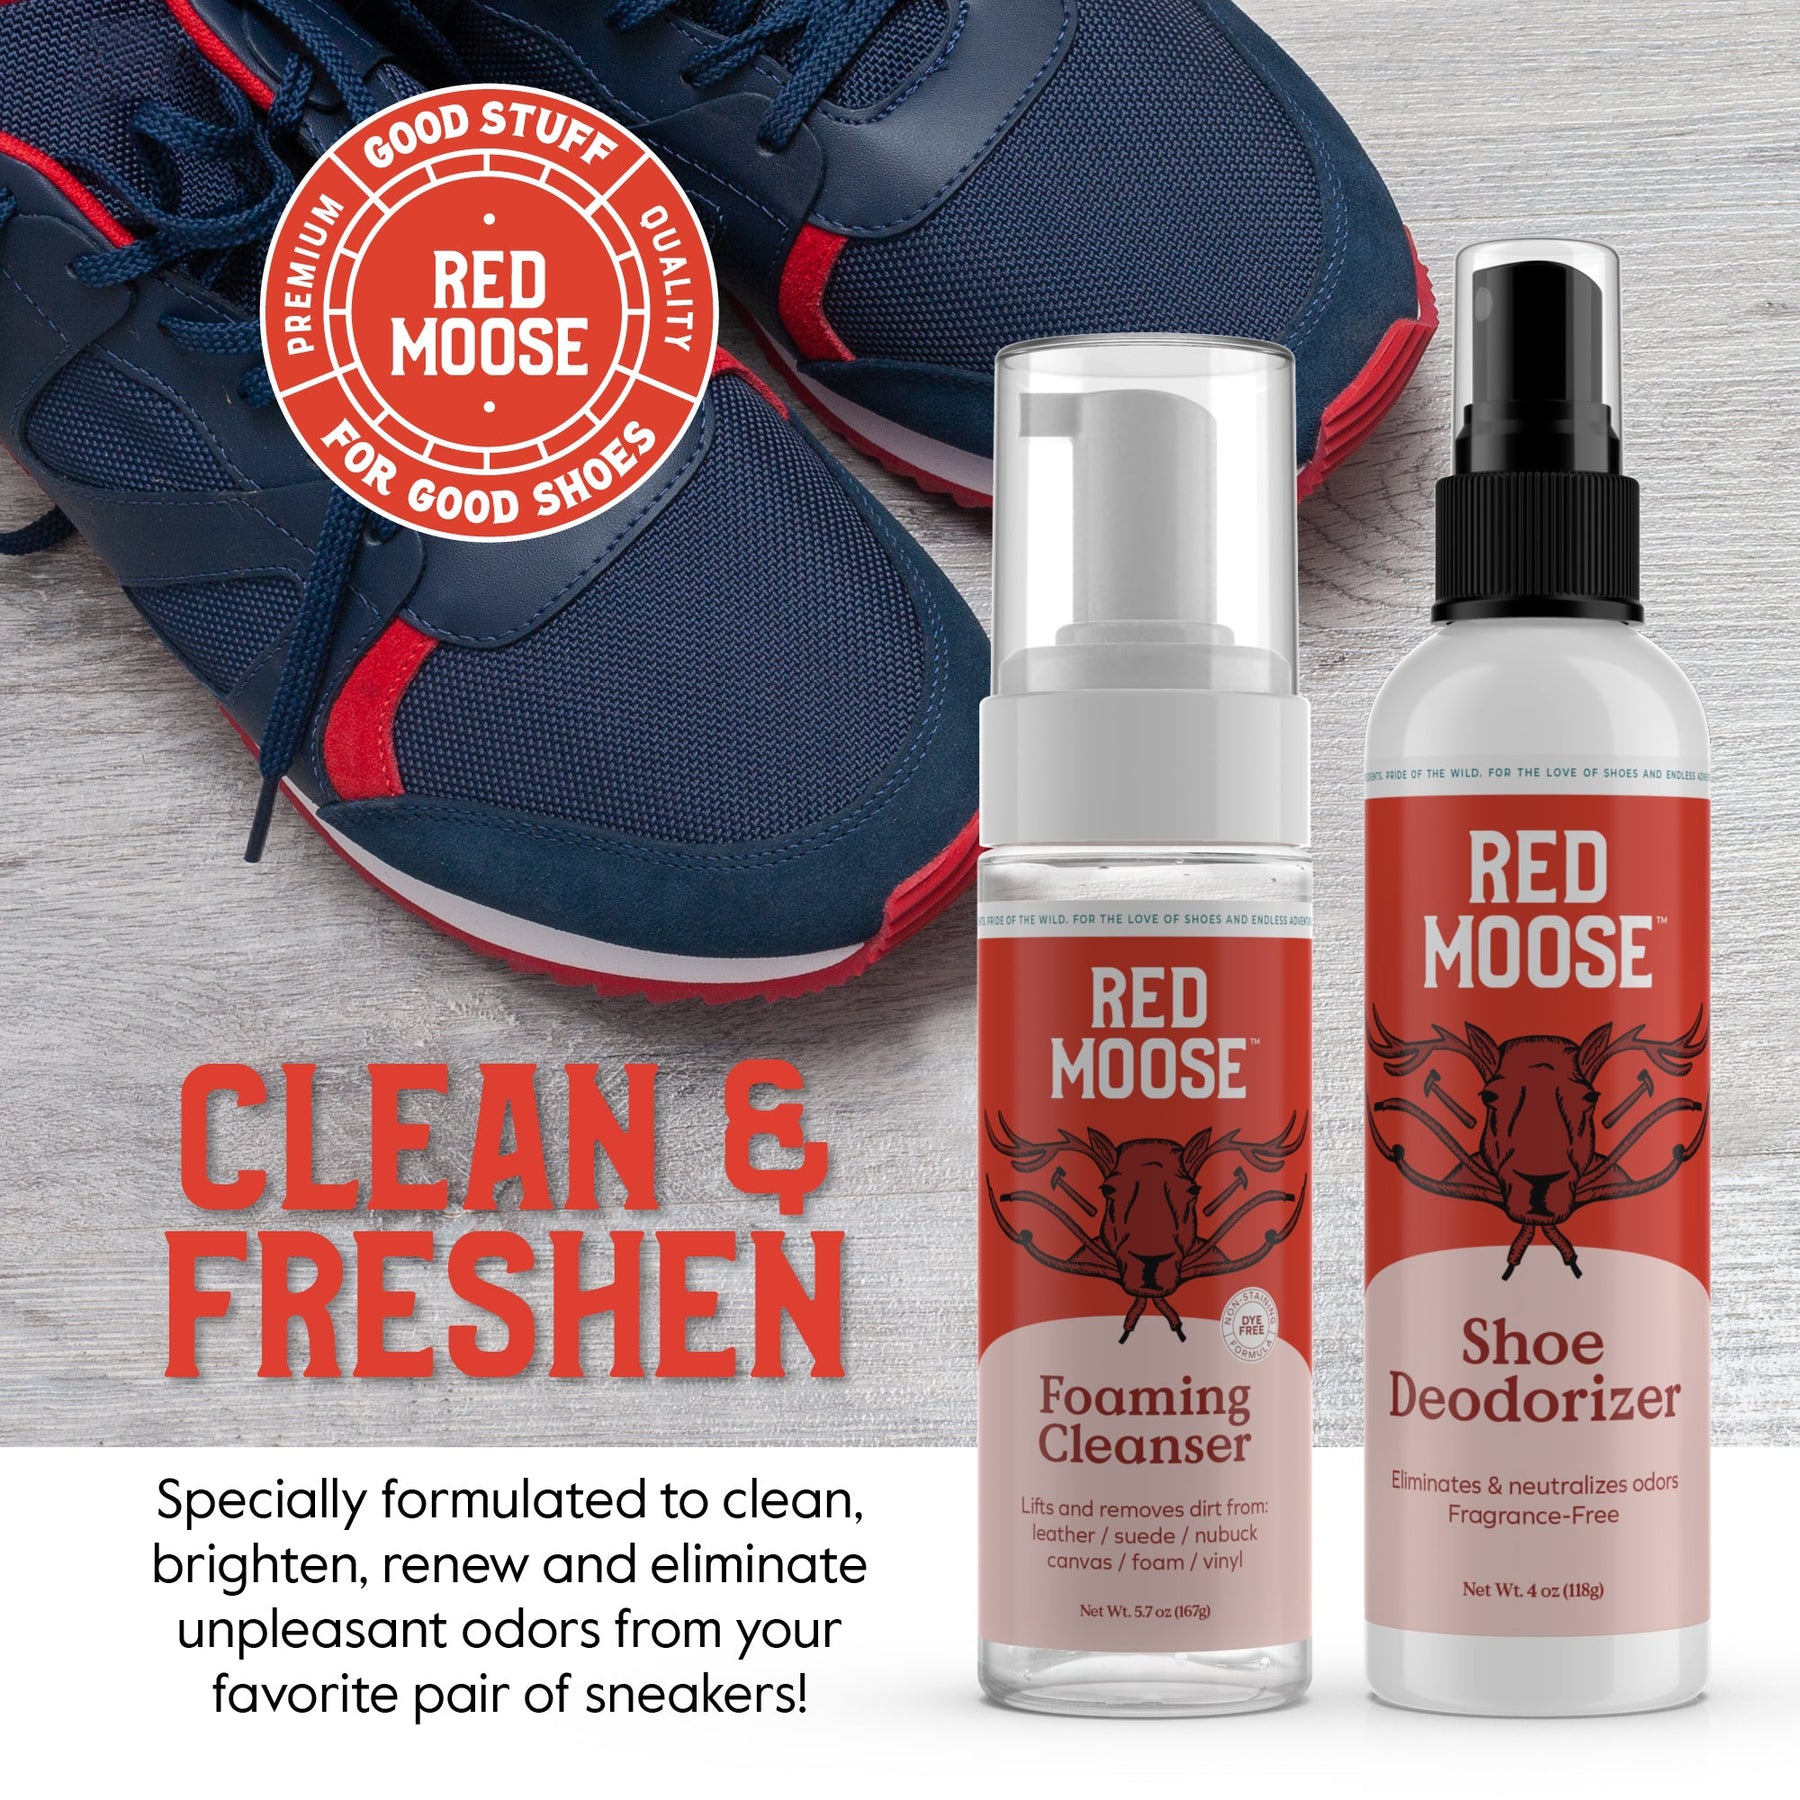 How to Brighten Worn White Sneakers – Red Moose